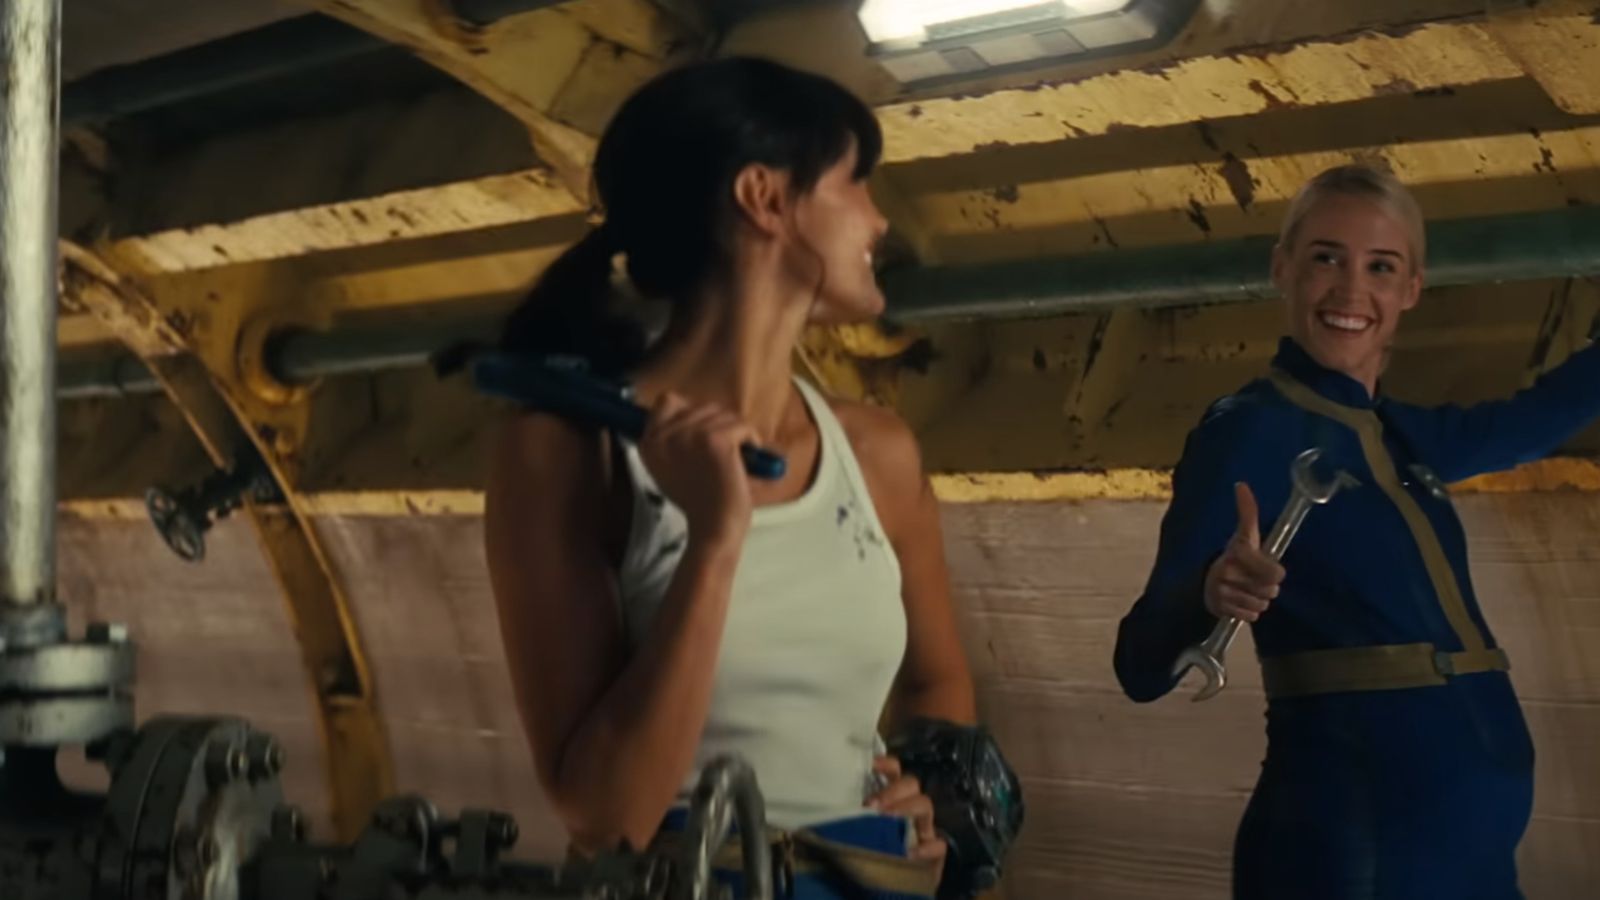 Annabel O'Hagan's Steph Harper performing maintenance duties opposite Ella Purnell's Lucy MacLean. Screenshot taken from the Fallout Official Trailer.